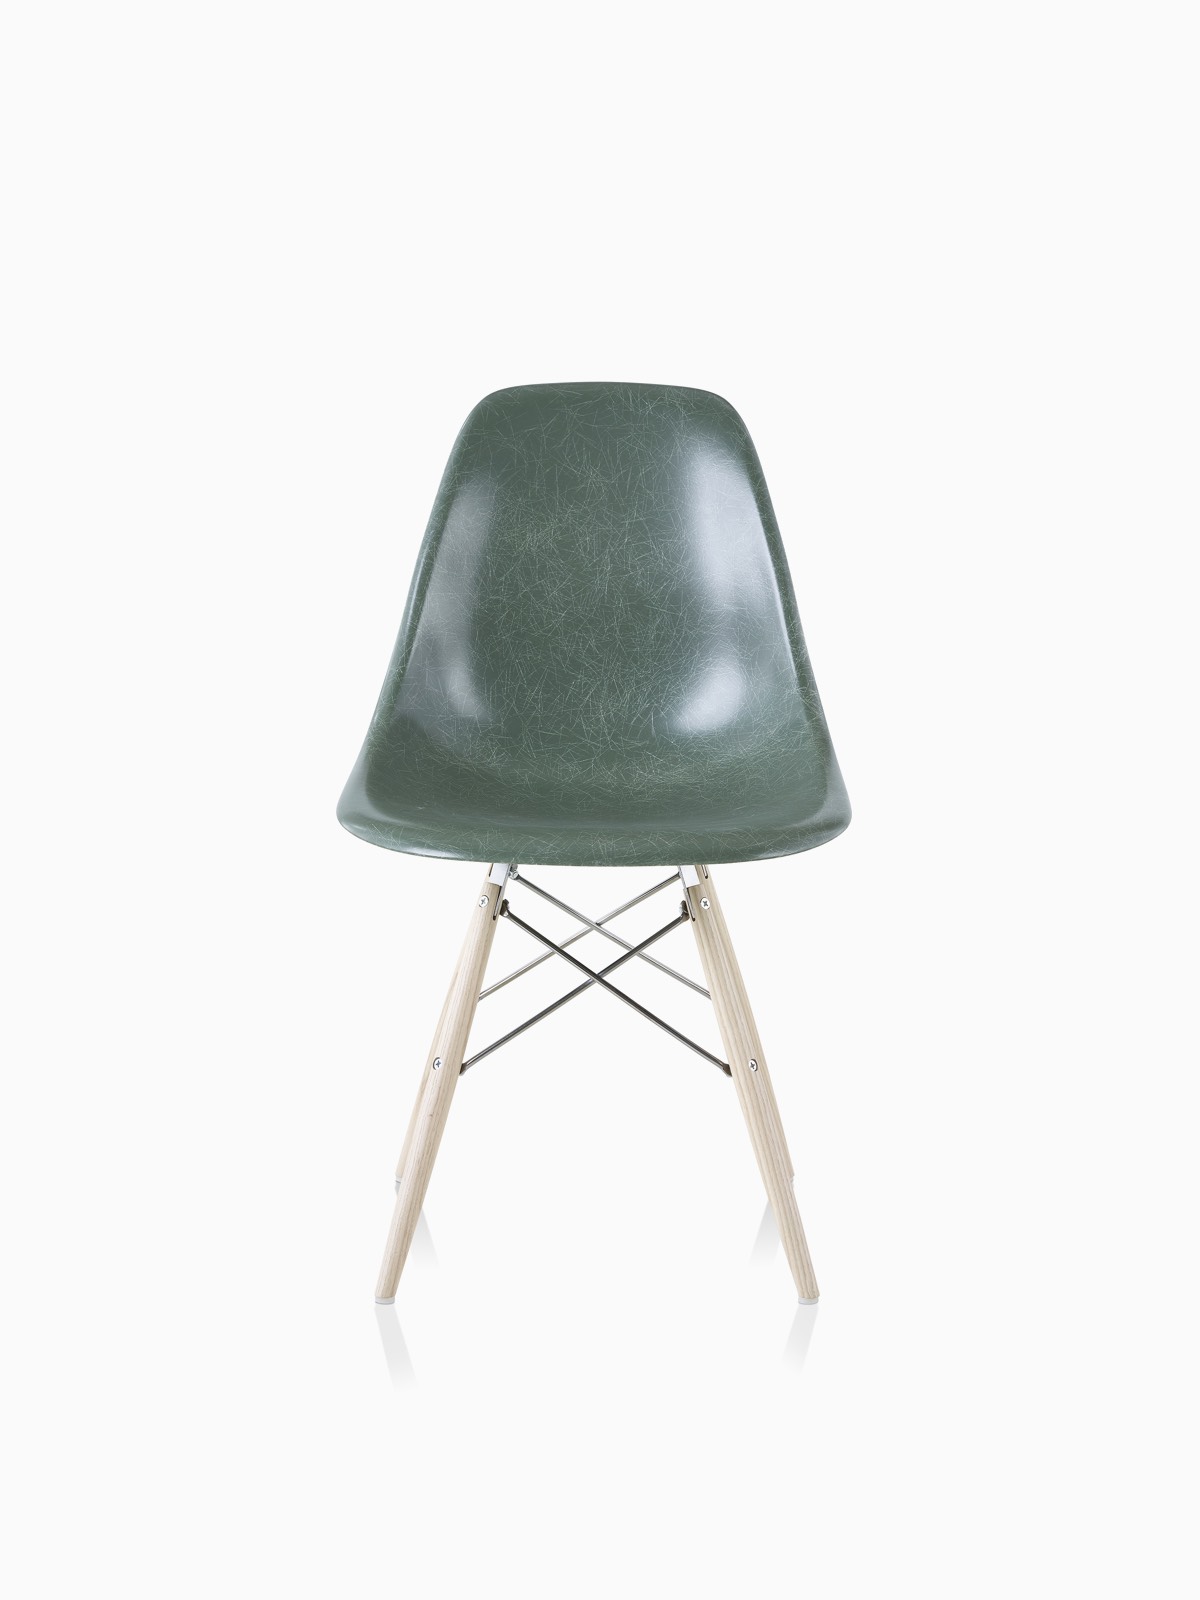 Eames Moulded Fibreglass Chairs